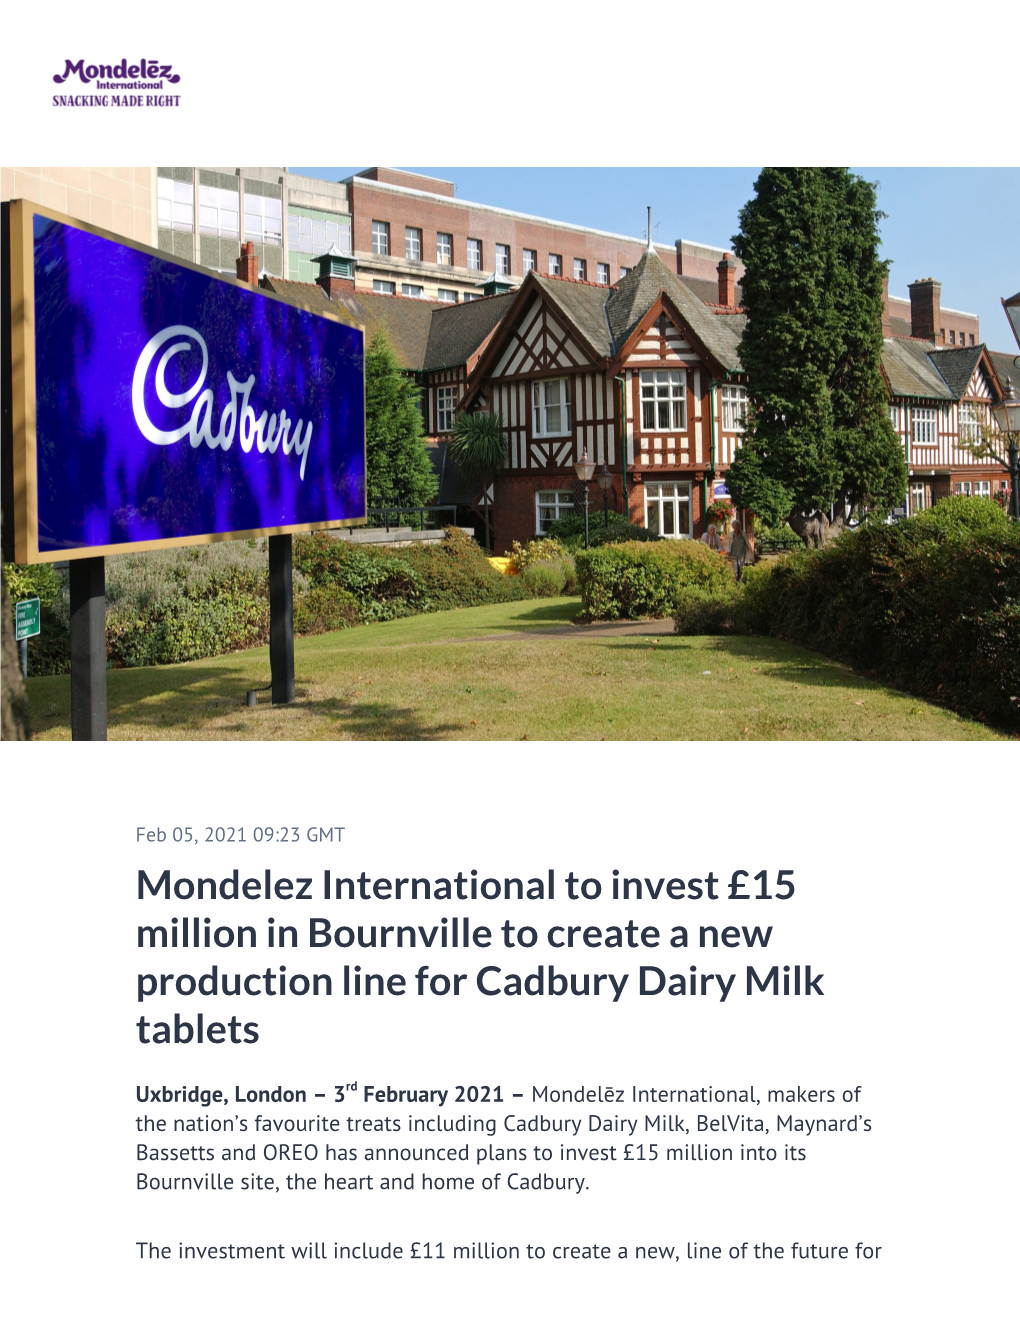 Mondelez International to Invest £15 Million in Bournville to Create a New Production Line for Cadbury Dairy Milk Tablets